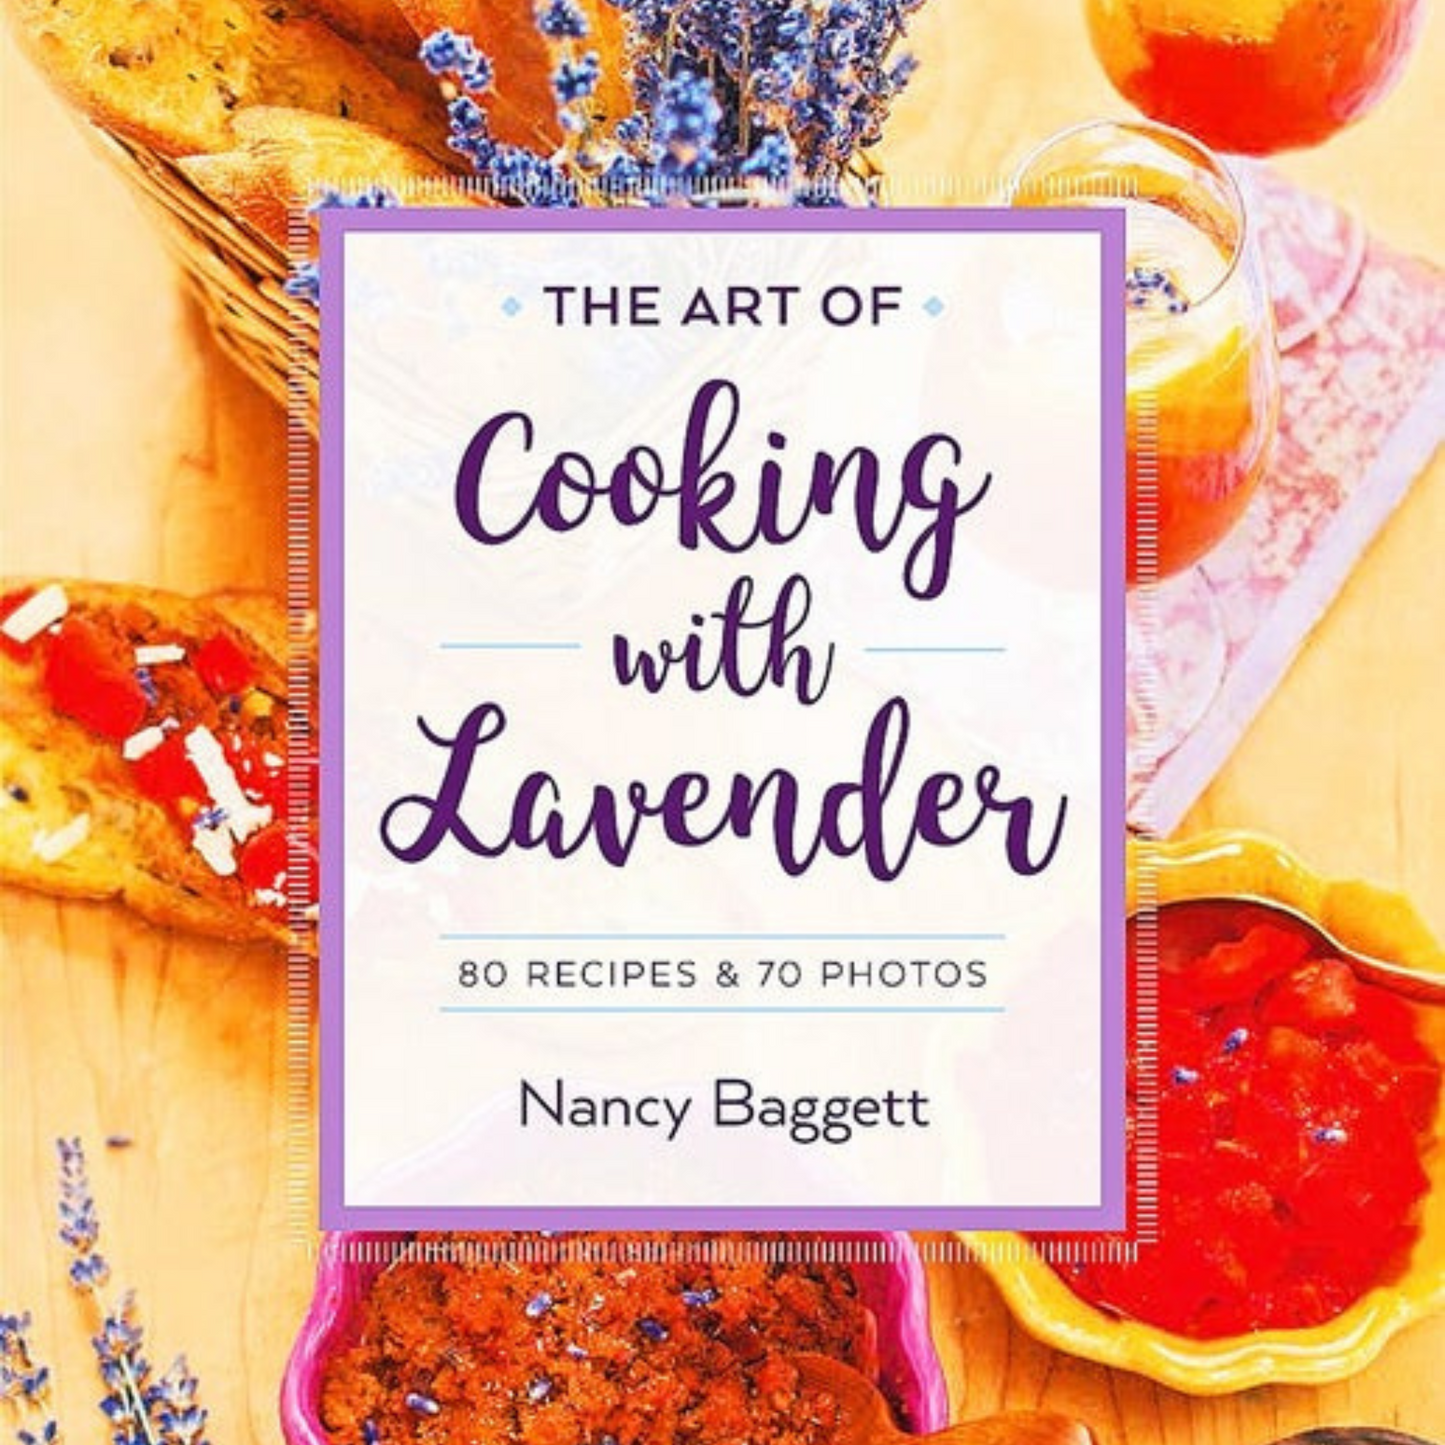 Cooking with Lavender by Nancy Baggett